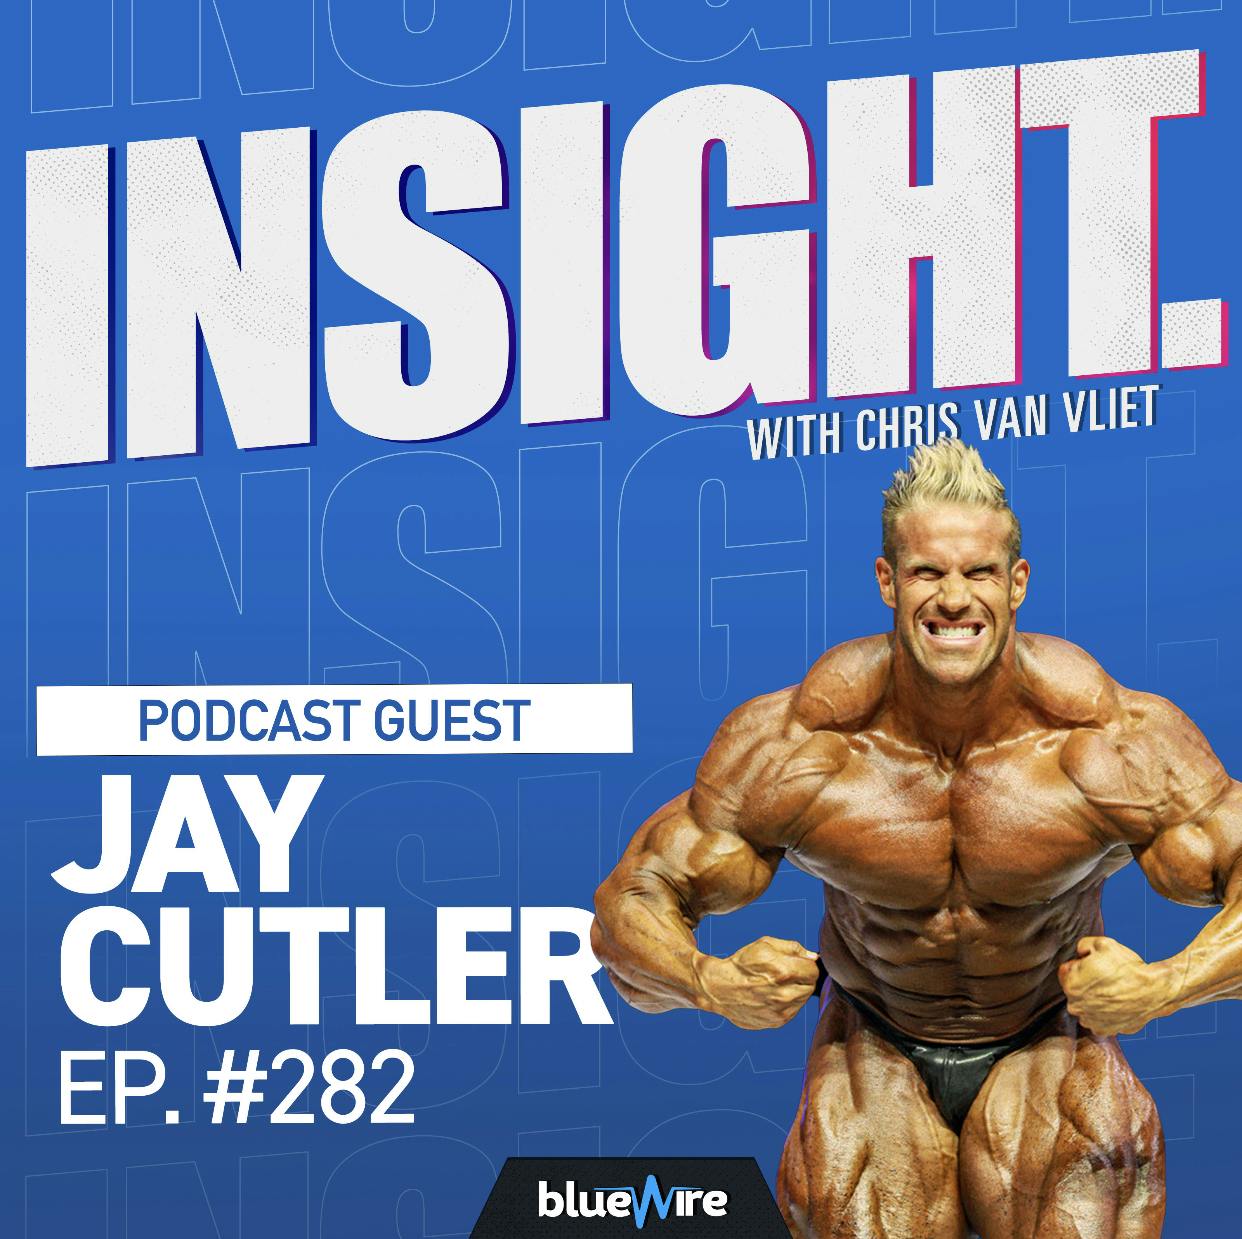 Jay Cutler On Winning Mr. Olympia 4 Times, The Lessons Bodybuilding Teaches You And How To Build A Positive Mindset